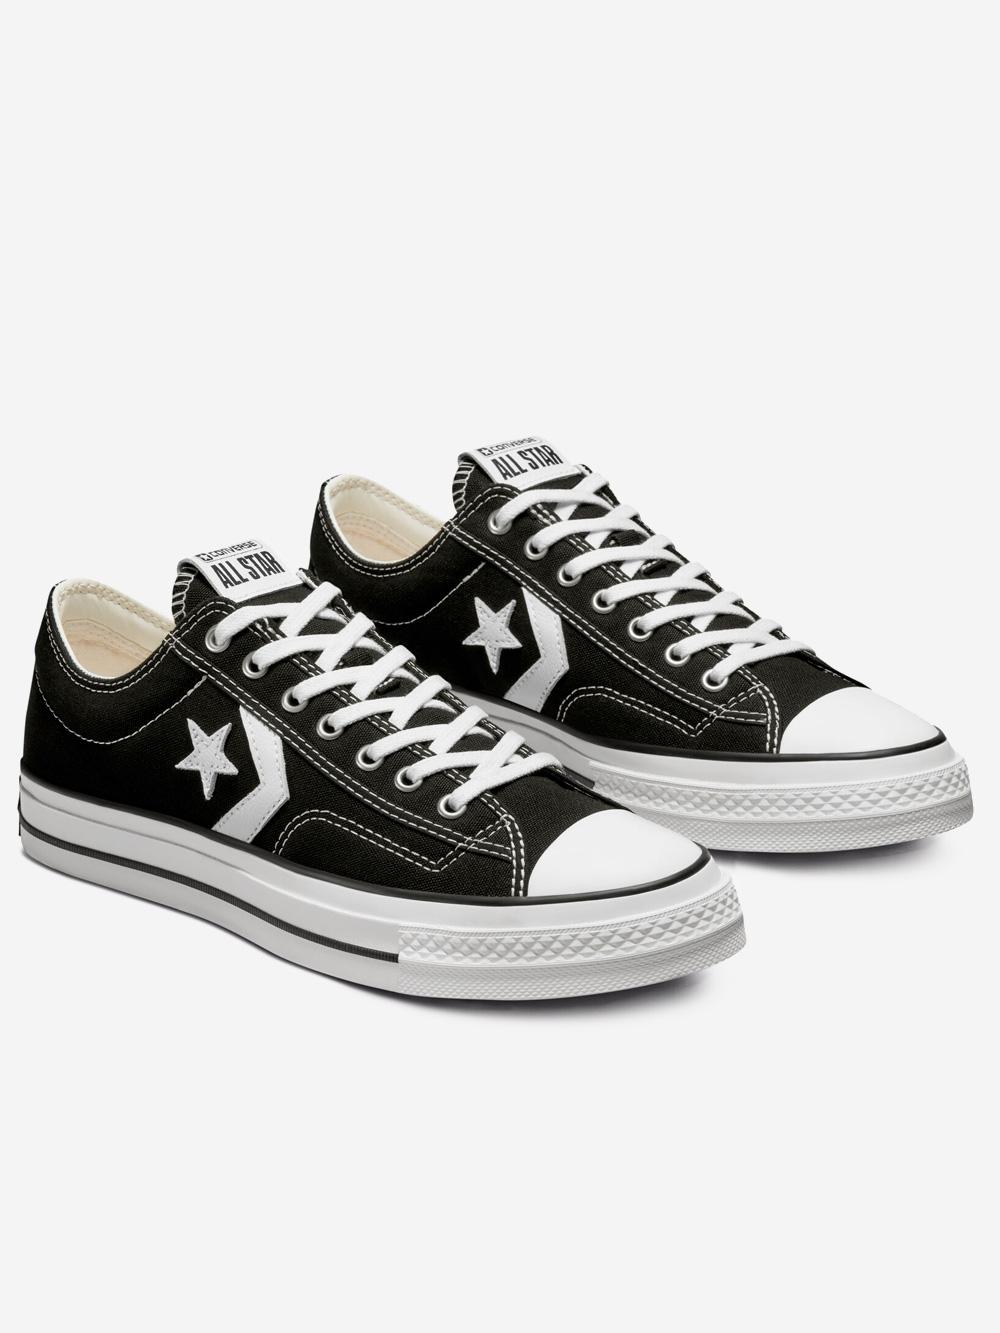 chrysant thermometer Downtown Converse Star Player 76 Ox Sneakers in Black | Lyst